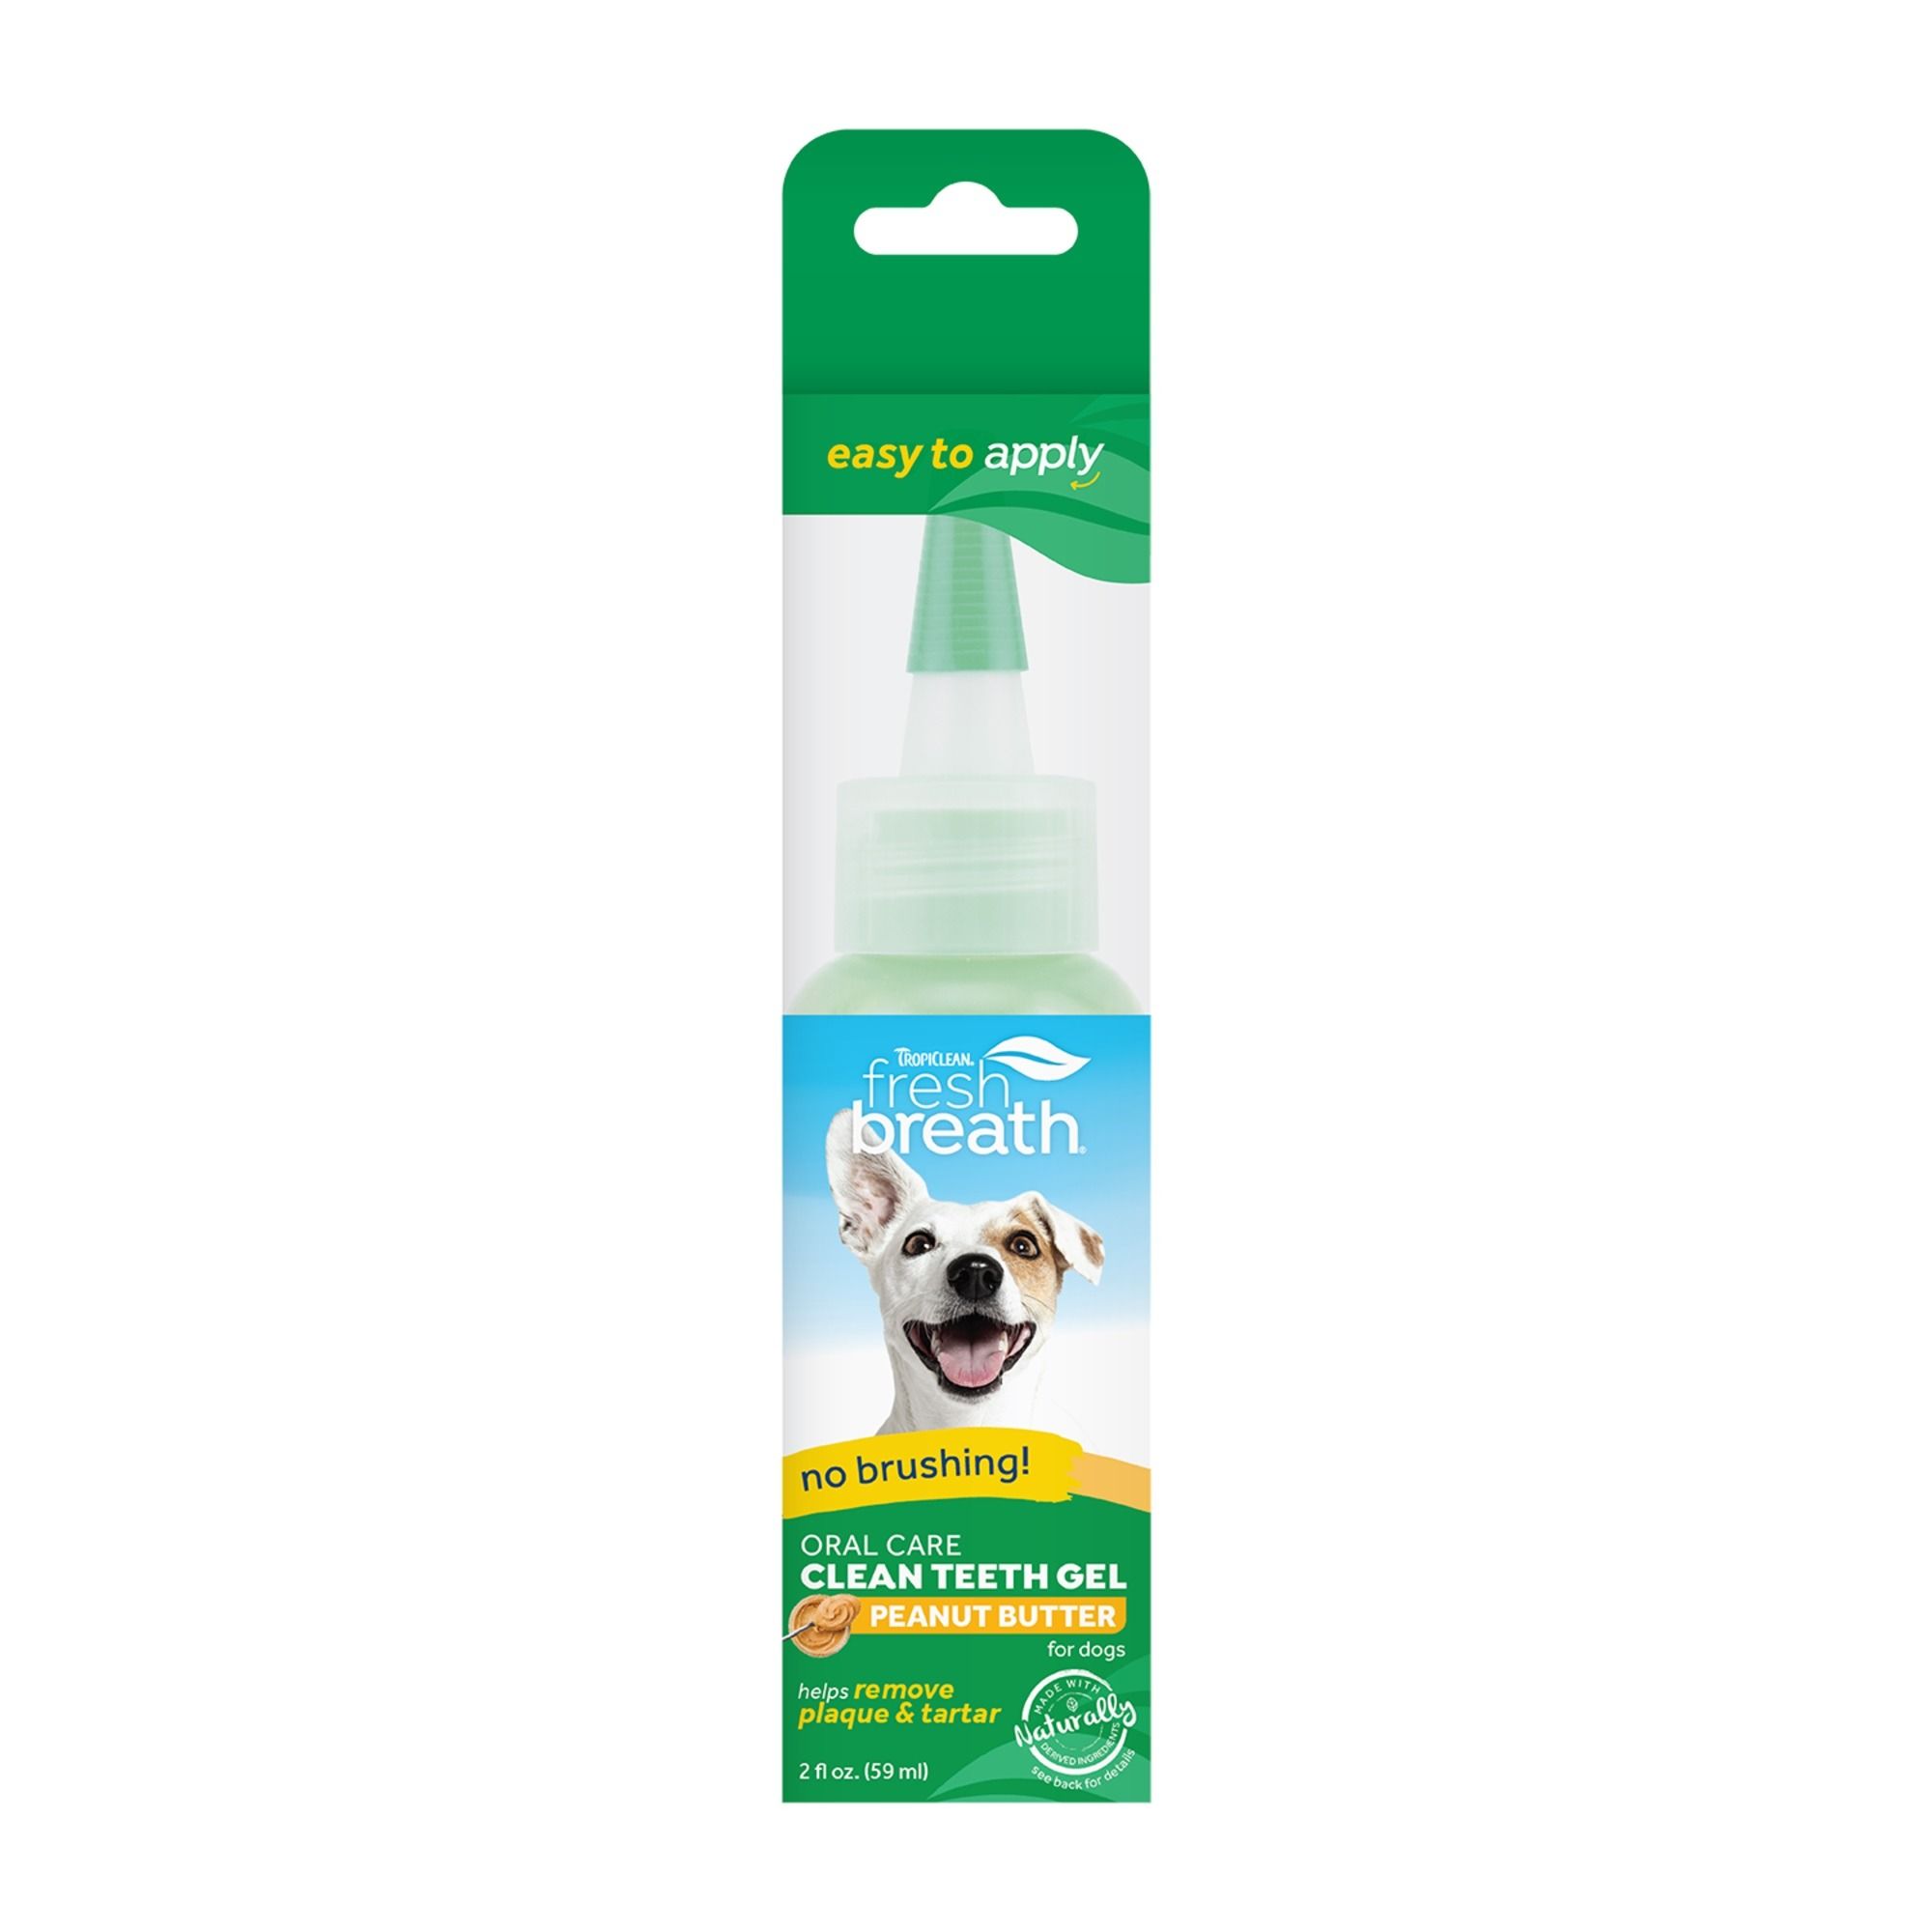 TropiClean Clean Teeth Oral Care Gel for Dogs - Peanut Butter - 59ml